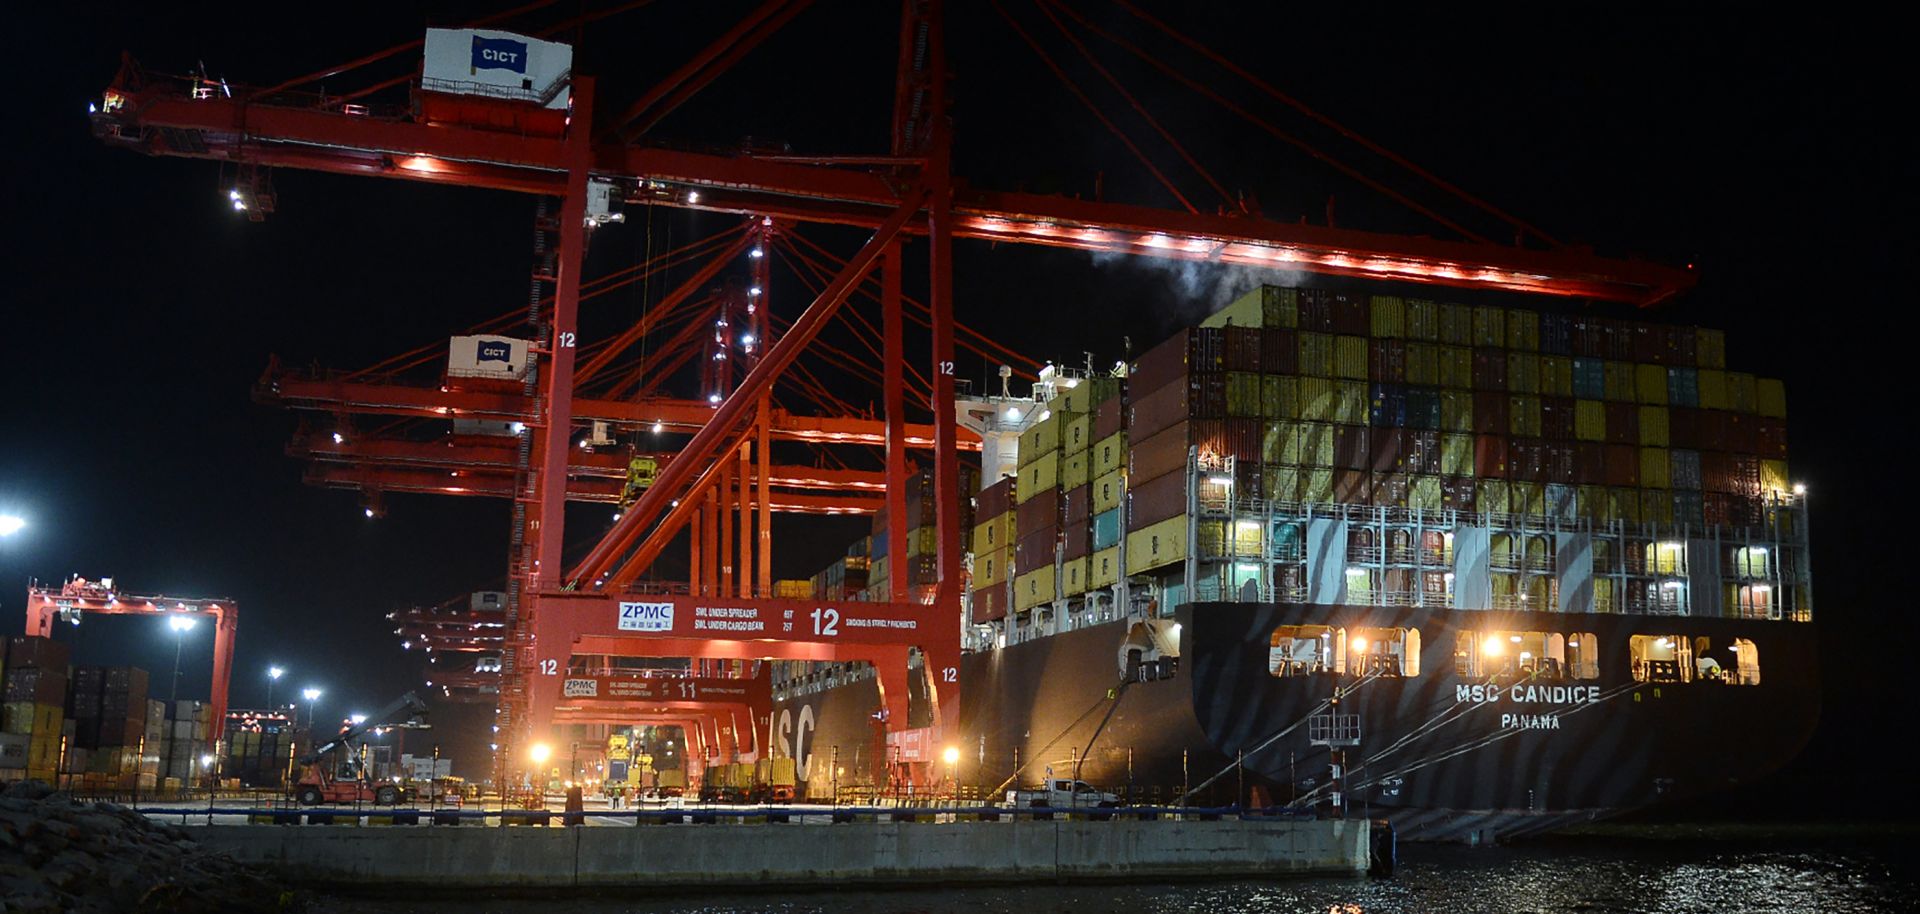 Workers at the Chinese-majority owned Colombo International Container Terminal (CICT) in Colombo load a cargo ship in this photograph from June 24, 2016.